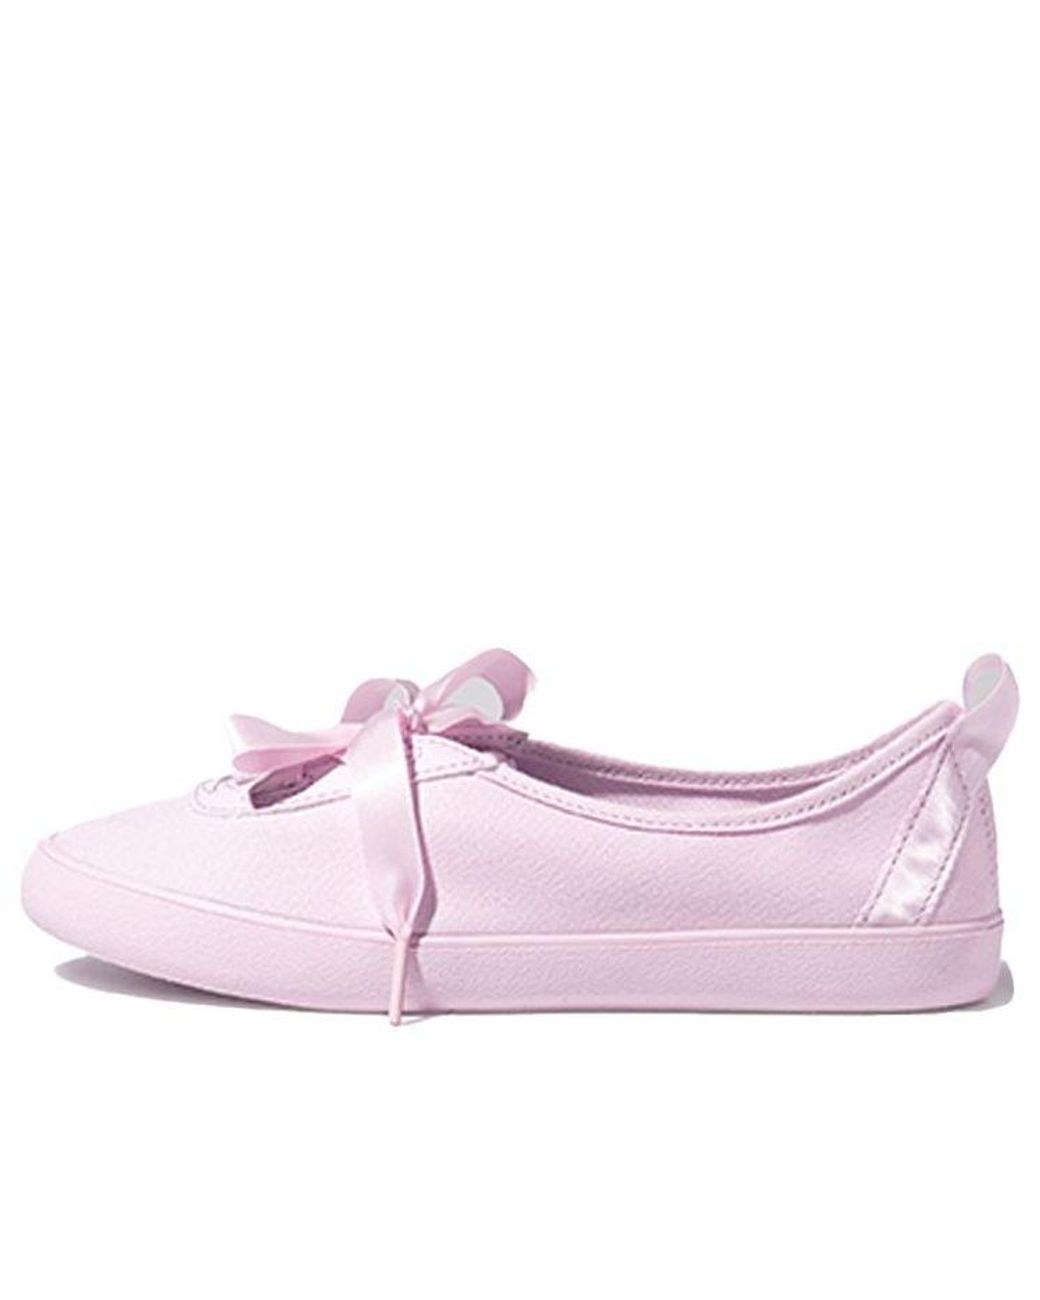 Adidas Neo Courtitude Shoes Pink | Lyst